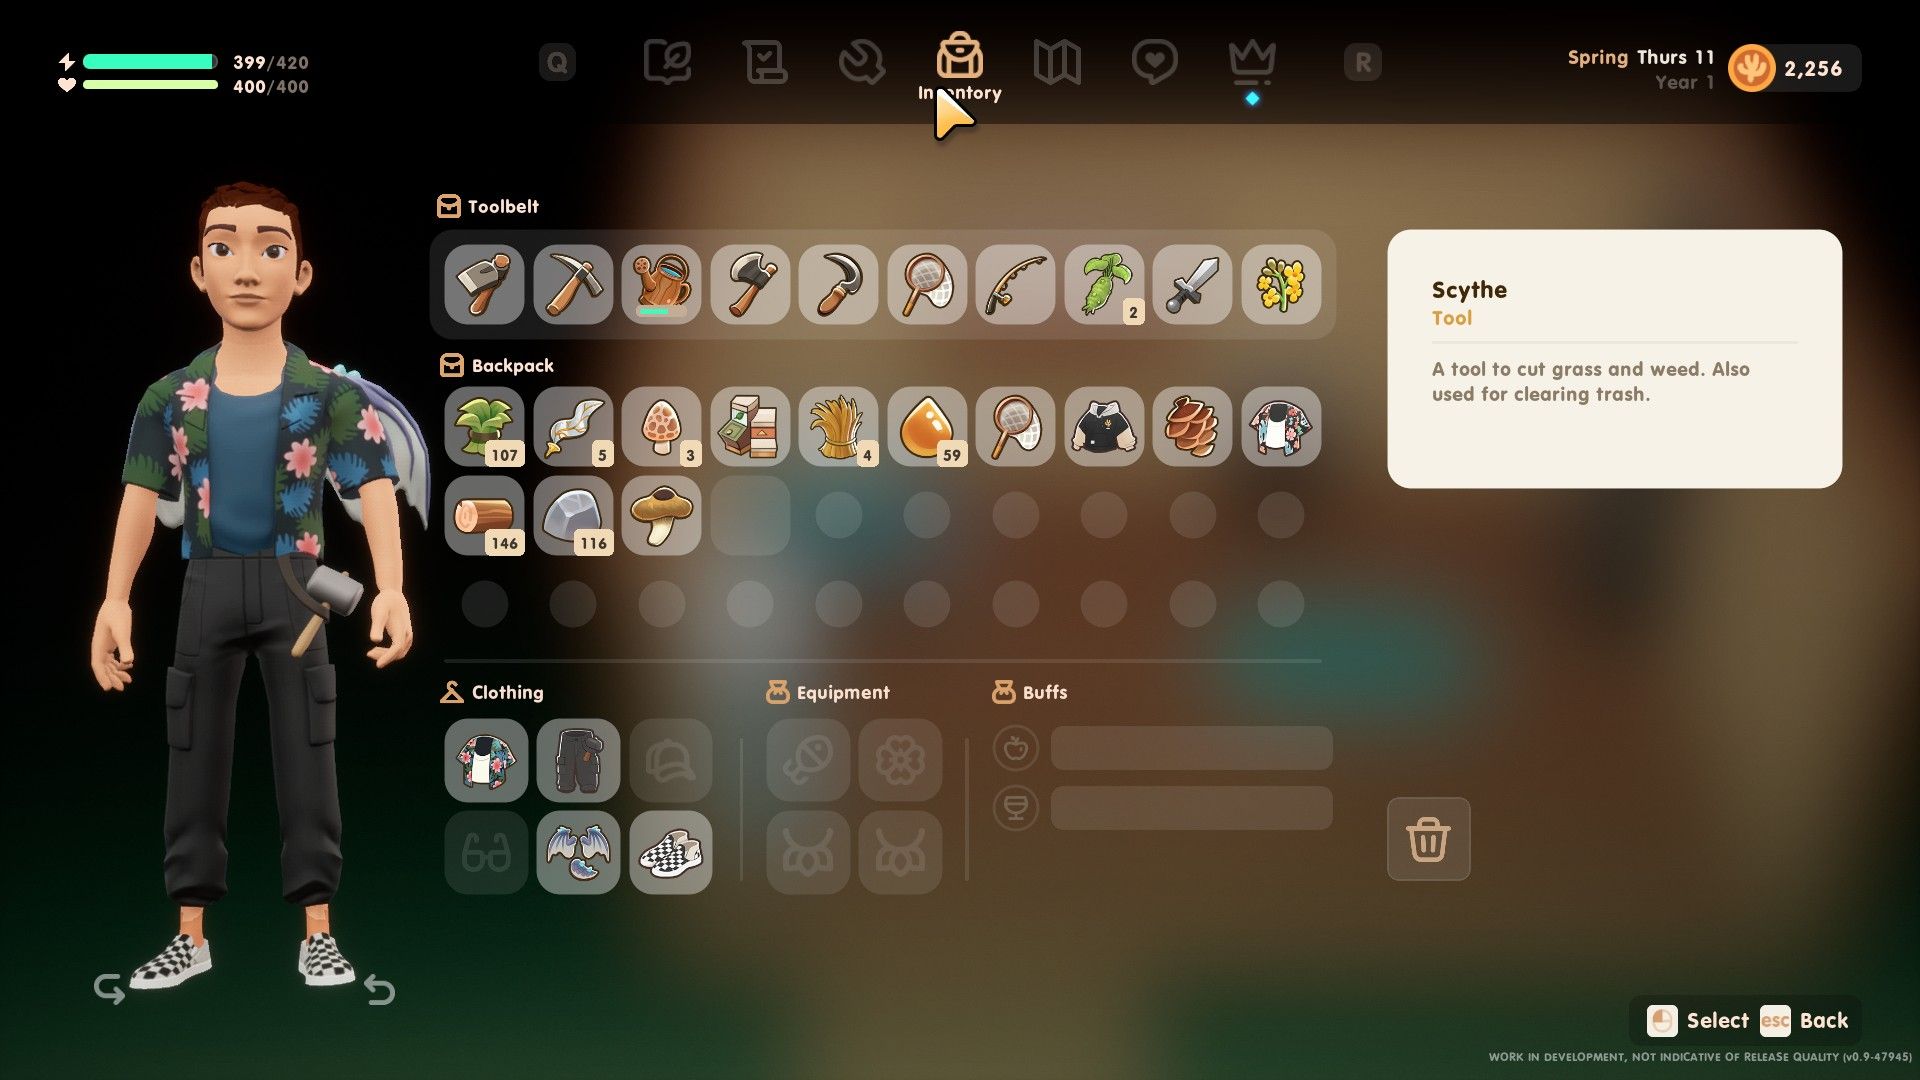 The farmer's inventory screen is very useful and gives you plenty of details to work with in Coral Island